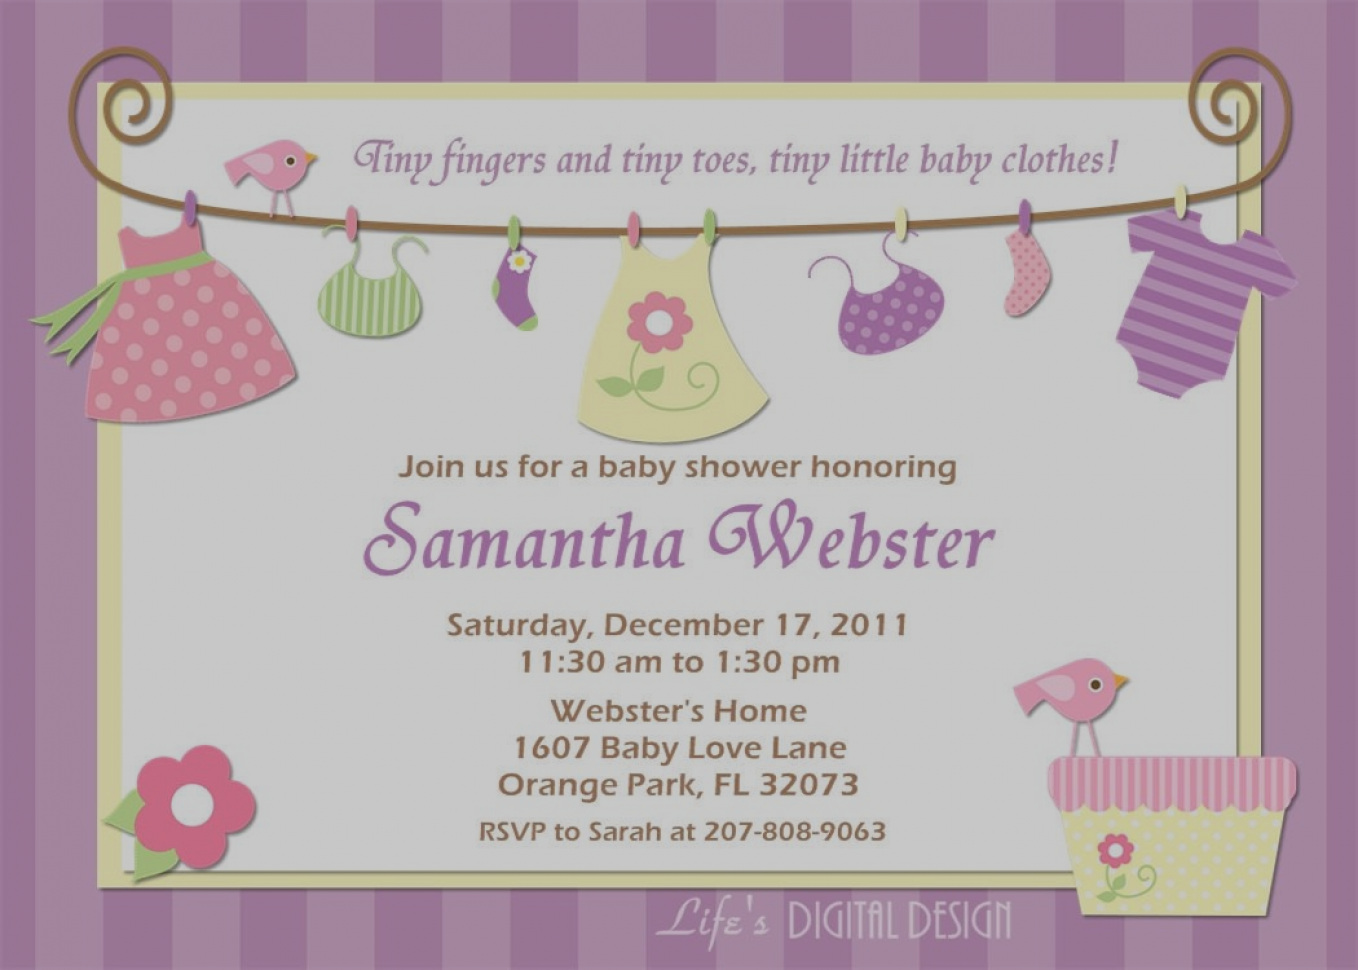 Full Size of Baby Shower:63+ Delightful Cheap Baby Shower Invitations Image Inspirations Cheap Baby Shower Invitations Baby Shower Wreath Baby Shower Video Baby Shower Fiesta Ideas Baby Shower Party Themes Adornos De Baby Shower